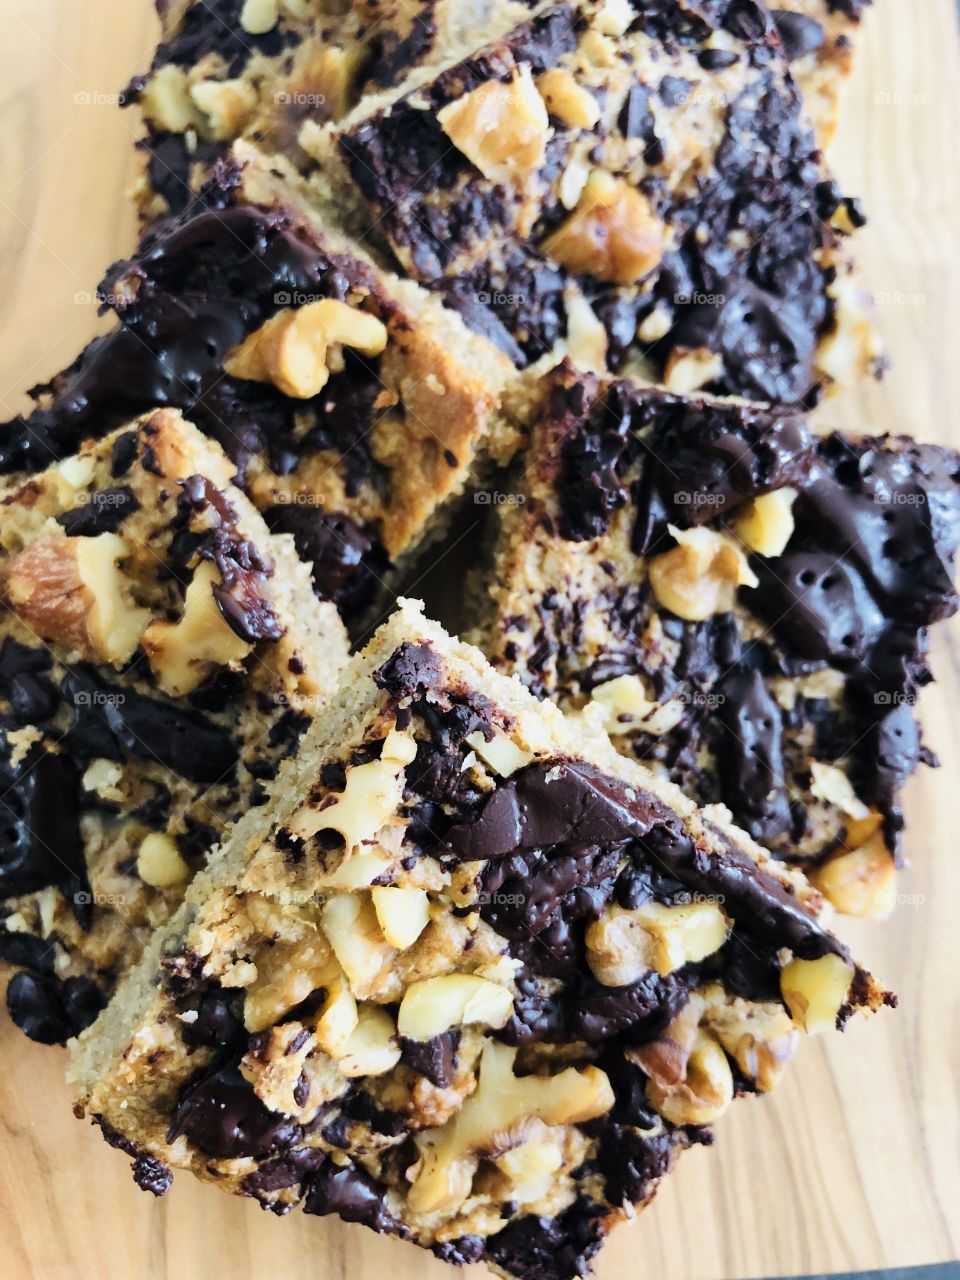 Snack time: Healthy no sugar Snicker bars including banana, dark chocolate, peanut butter and walnuts. Perfect bite!